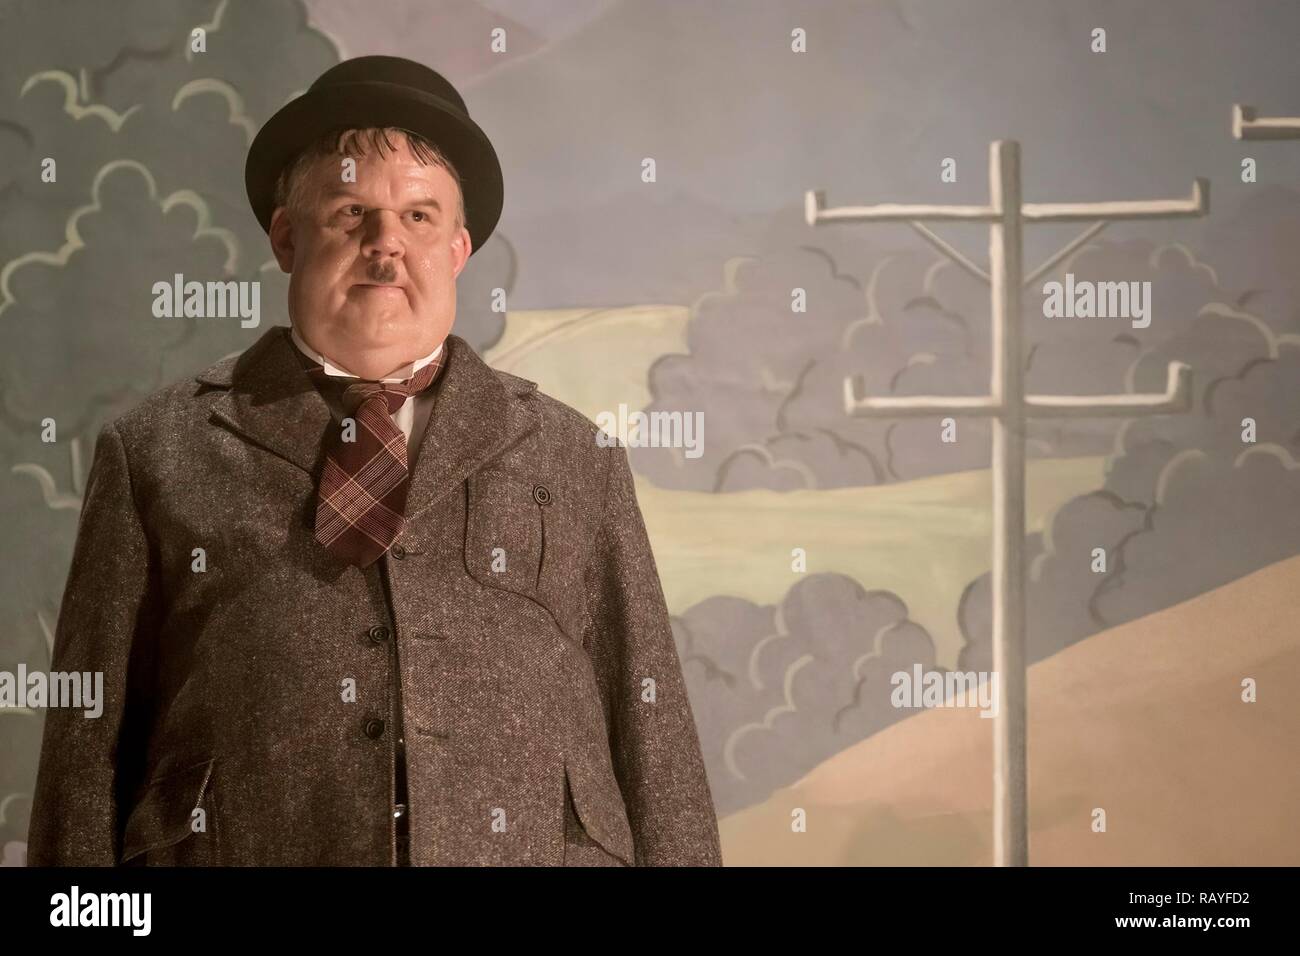 RELEASE DATE: January 19, 2019 TITLE: Stan & Ollie STUDIO: Sony Pictures Classics DIRECTOR: Jon S. Baird PLOT: Laurel and Hardy, the world's most famous comedy duo, attempt to reignite their film careers as they embark on what becomes their swan song - a grueling theatre tour of post-war Britain. STARRING: JOHN C. REILLY as Oliver Hardy. (Credit Image: © Sony Pictures/Entertainment Pictures/ZUMAPRESS.com). Original film title: STAN & OLLIE. English title: STAN & OLLIE. Year: 2018. Director: JON S. BAIRD. Stars: JOHN C. REILLY. Credit: ENTERTAINMENT ONE/BBC FILMS/FABLE PICTURES / Album Stock Photo